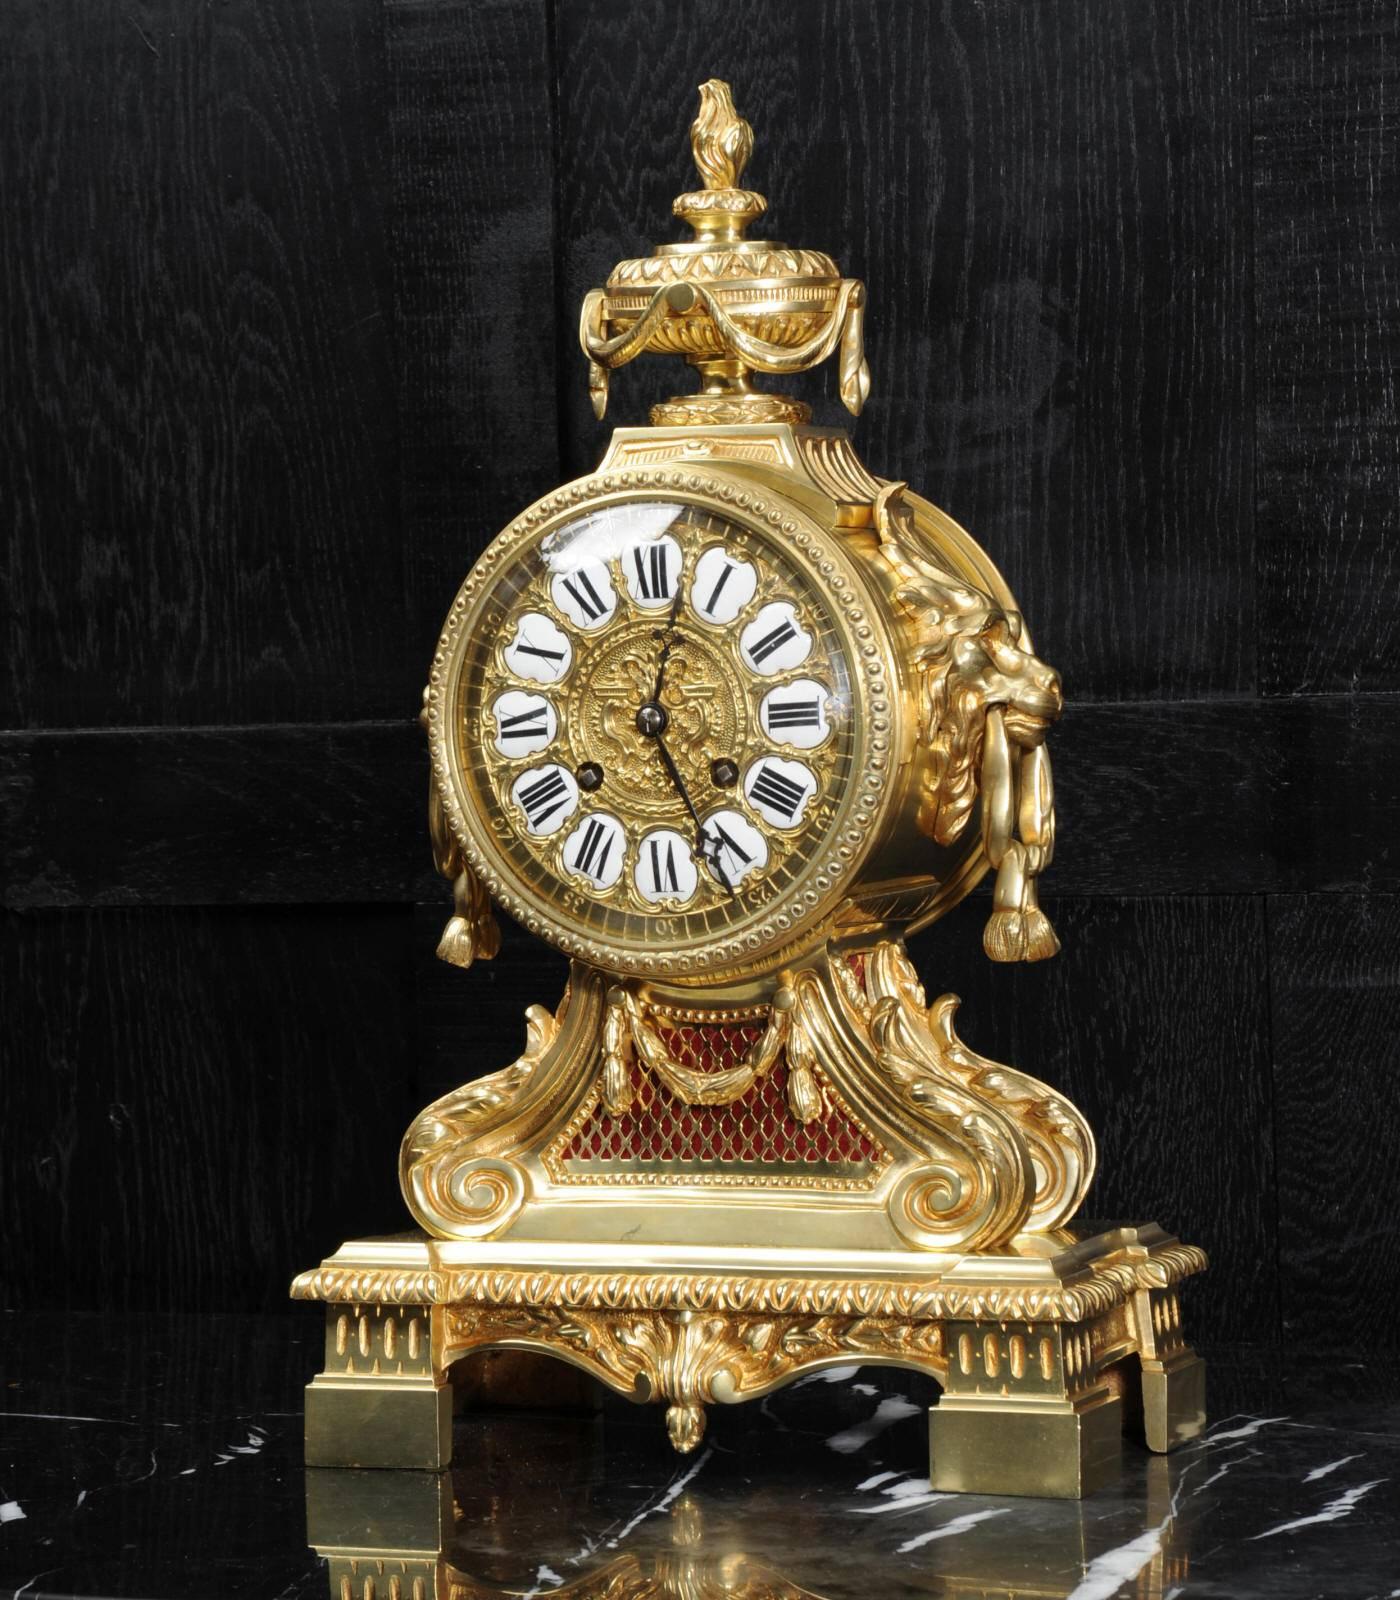 A large, imposing and heavy original antique French gilt bronze clock dating from 1870. It is a beautifully made drum head clock in the classical style of Louis XVI and retailed by G. Philippe, Palais Royal. The movement is mounted in a large drum